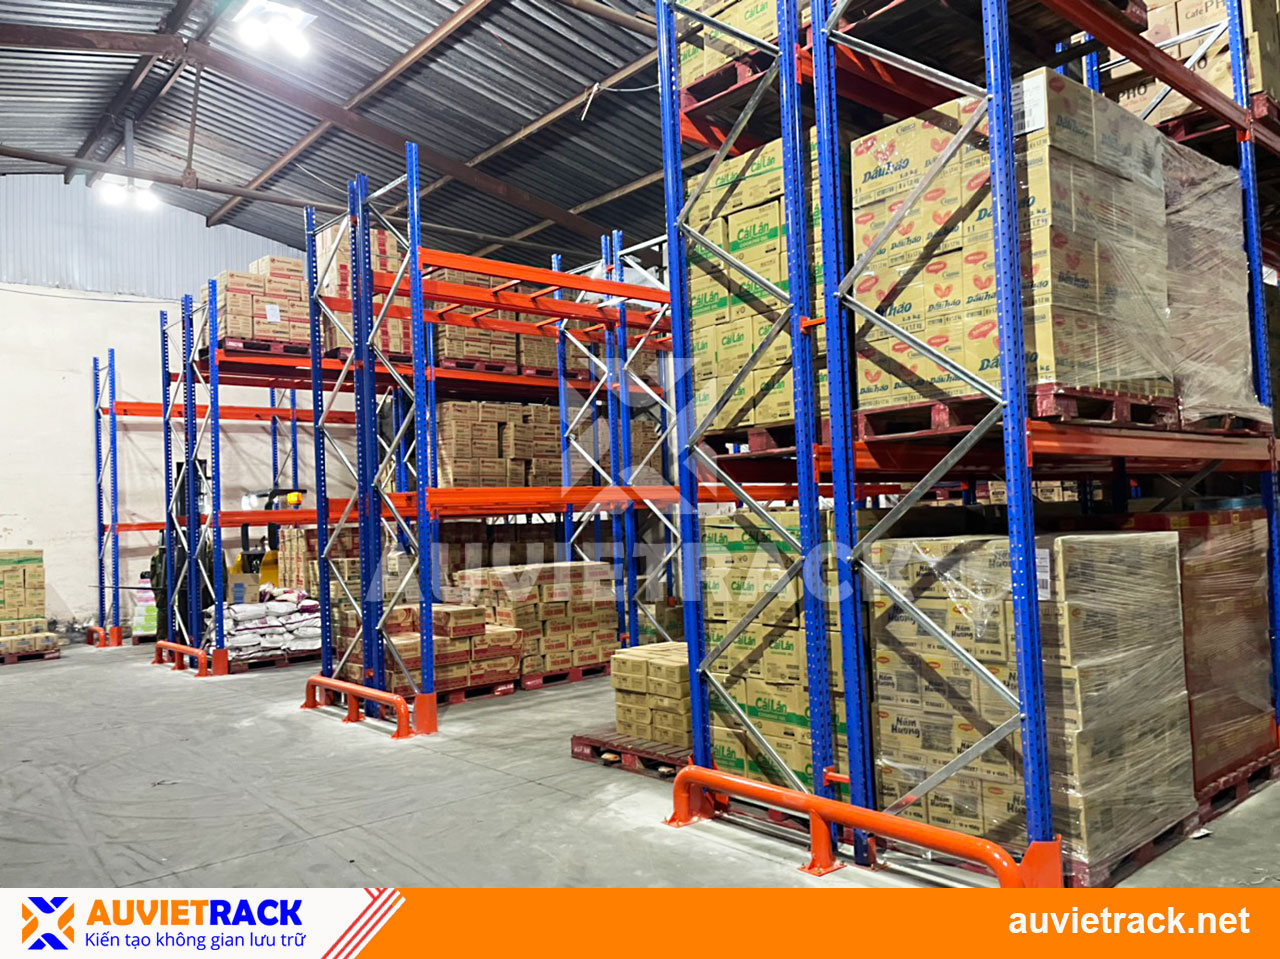 Selective Racking in food storage warehouses